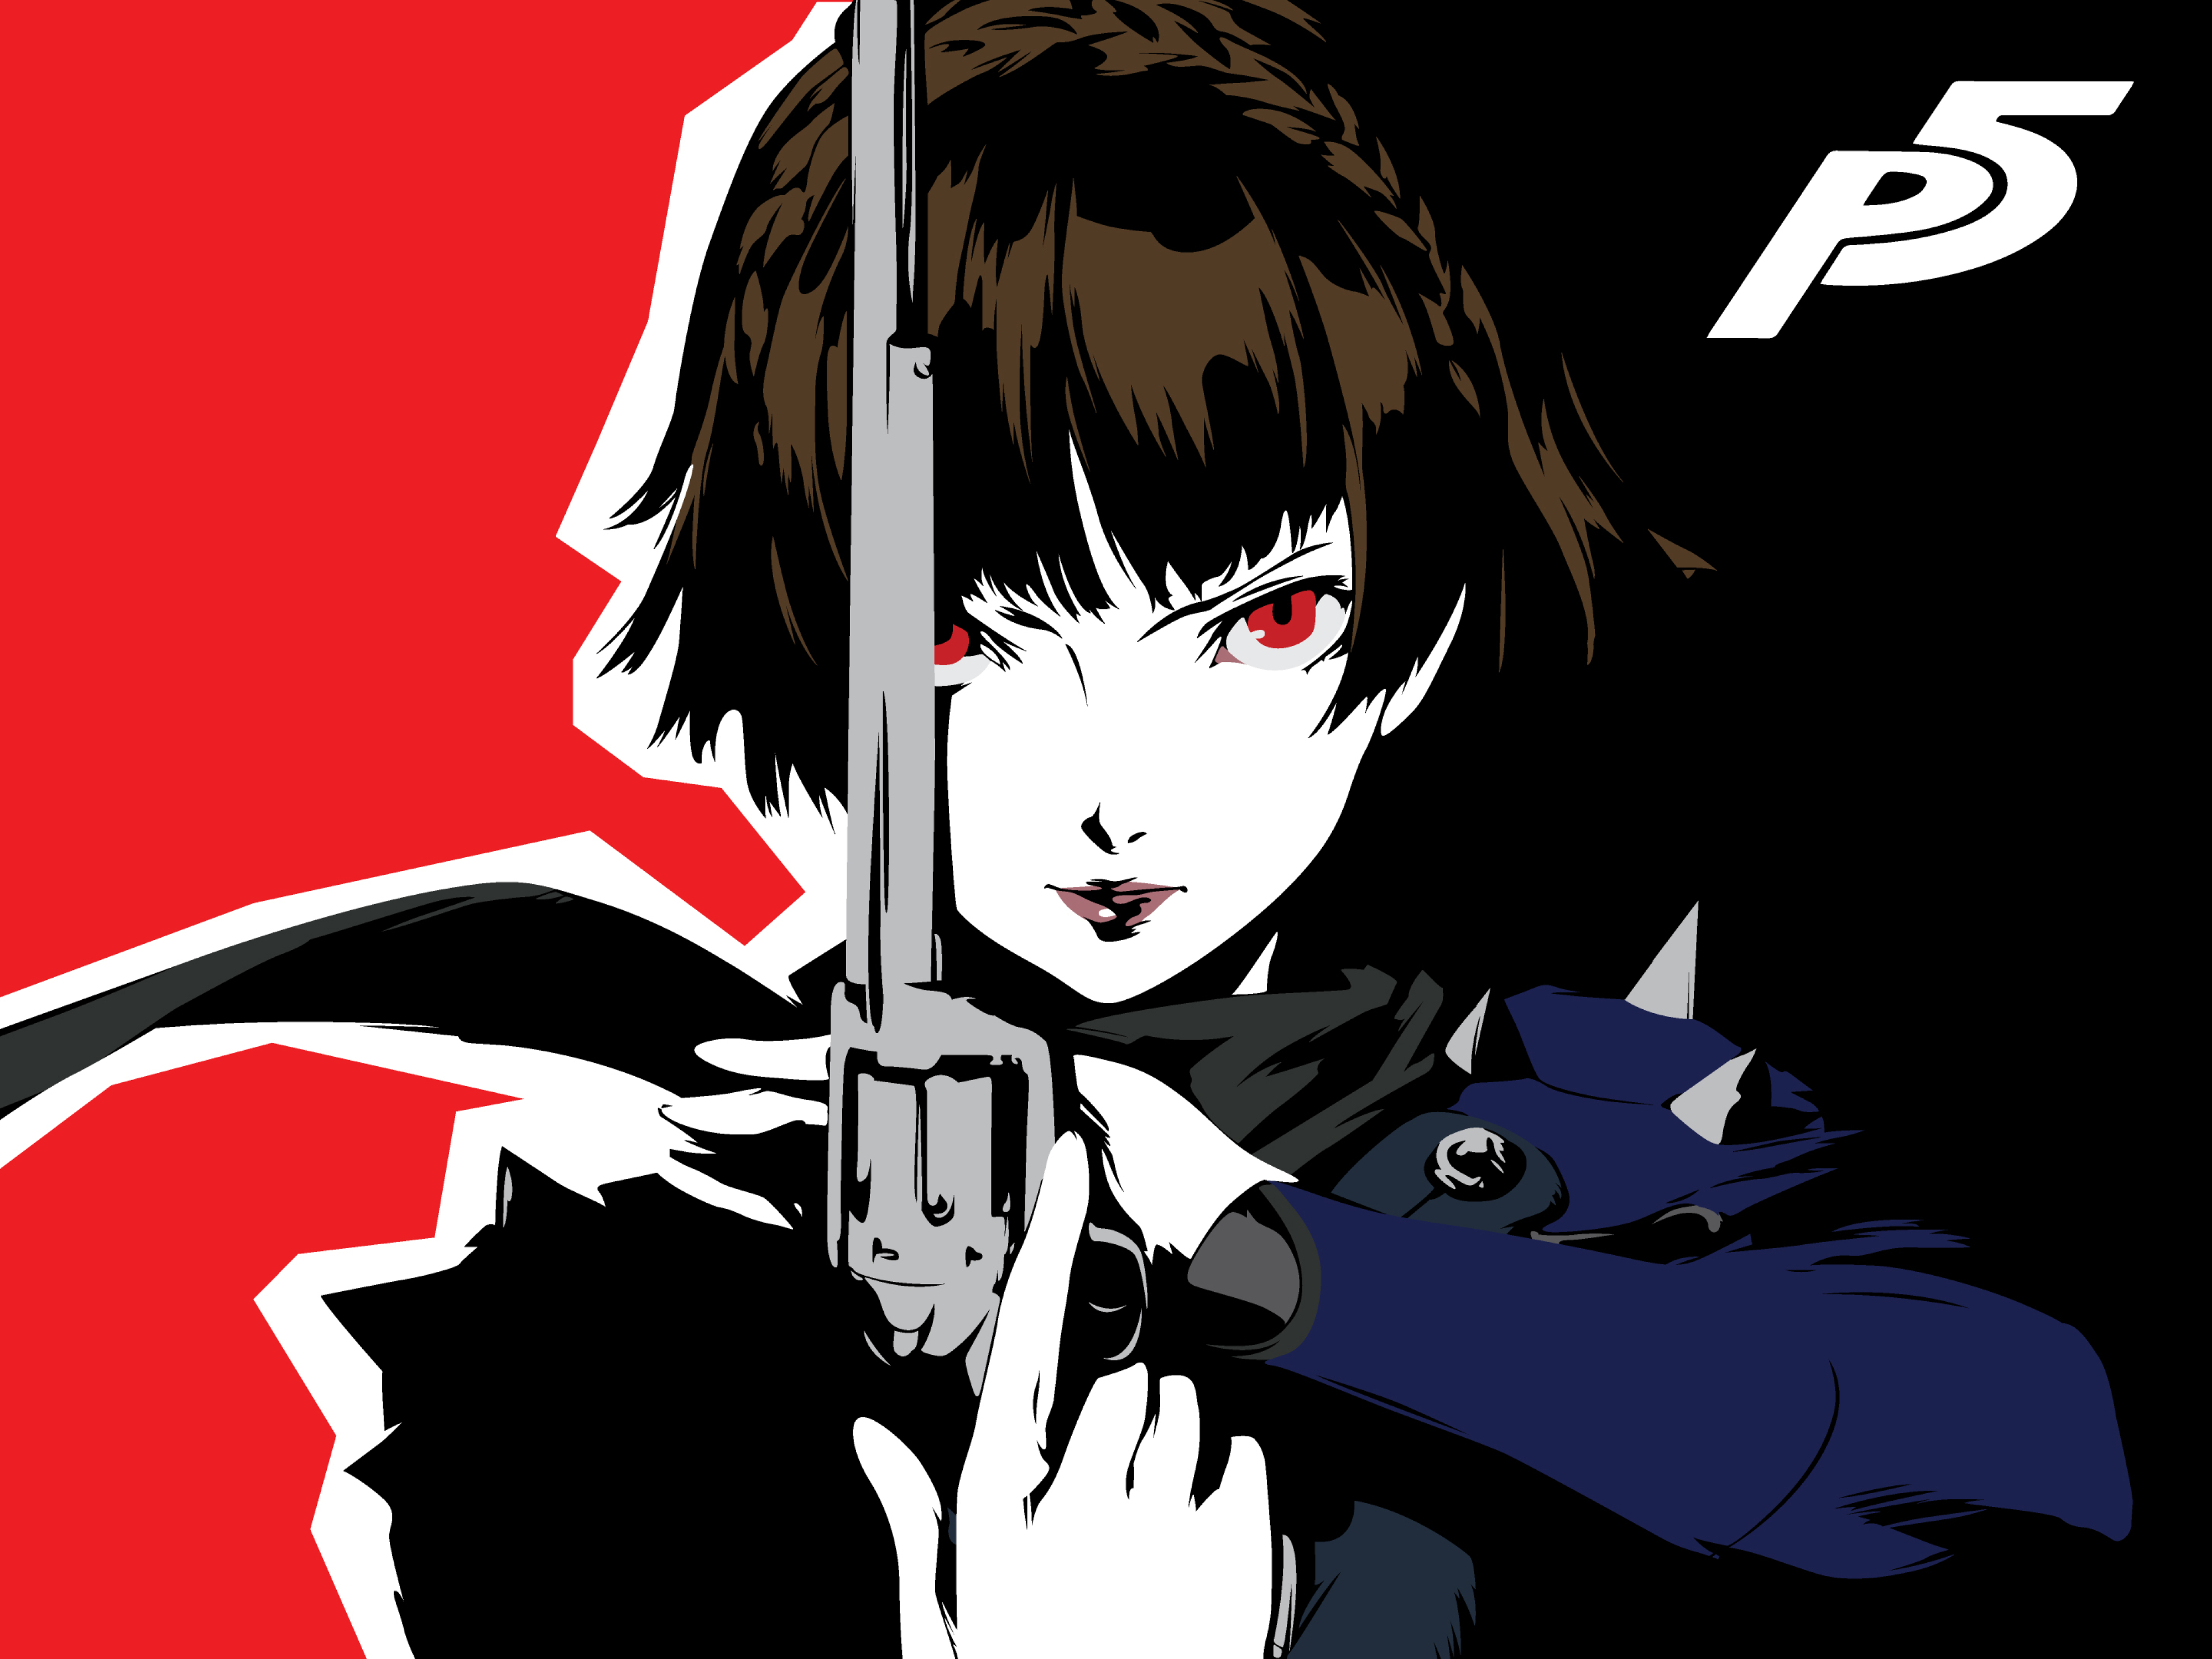 4000x3000 Resolution Queen Persona 5 Anime Girl 4K 4000x3000 Resolution ...